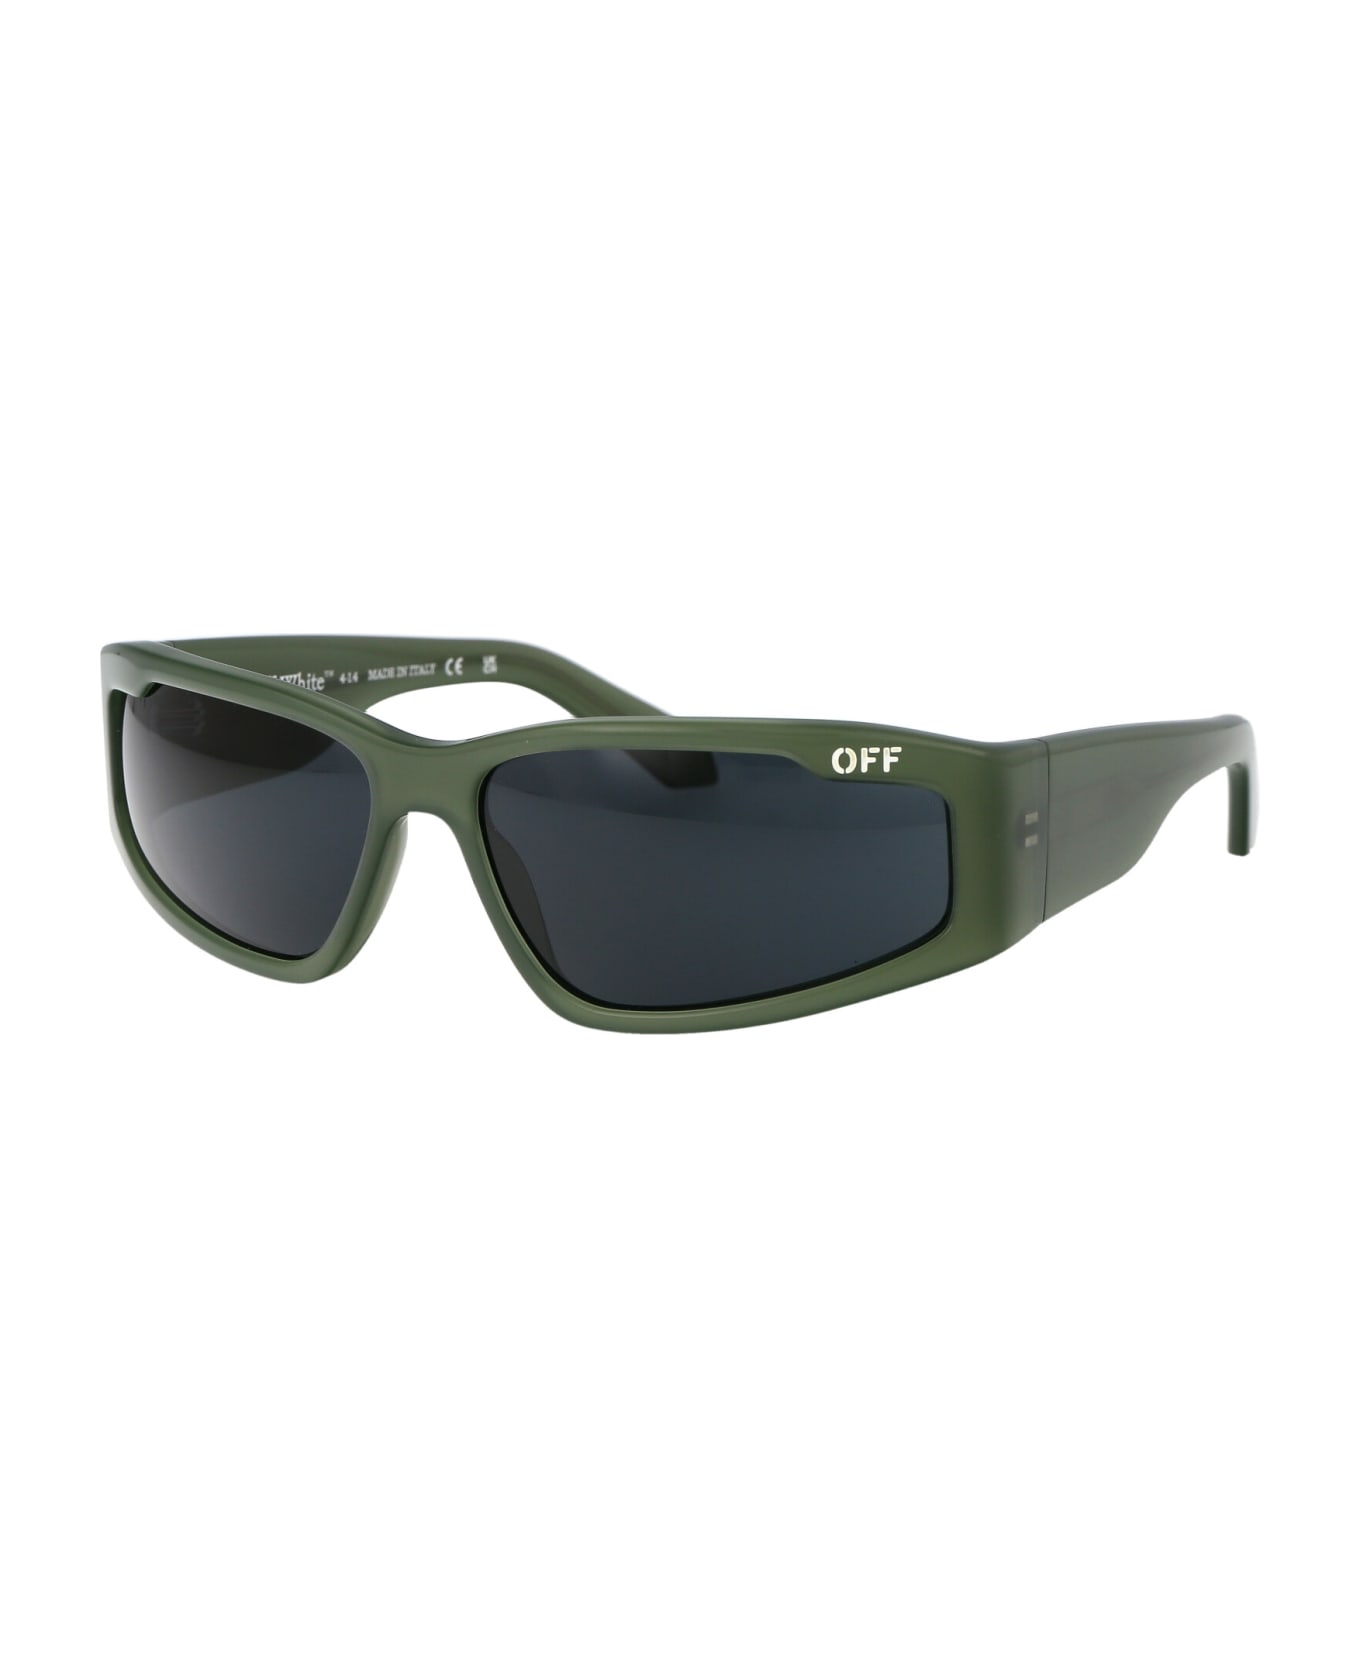 Off-White Kimball Sunglasses - 5707 OLIVE GREEN 